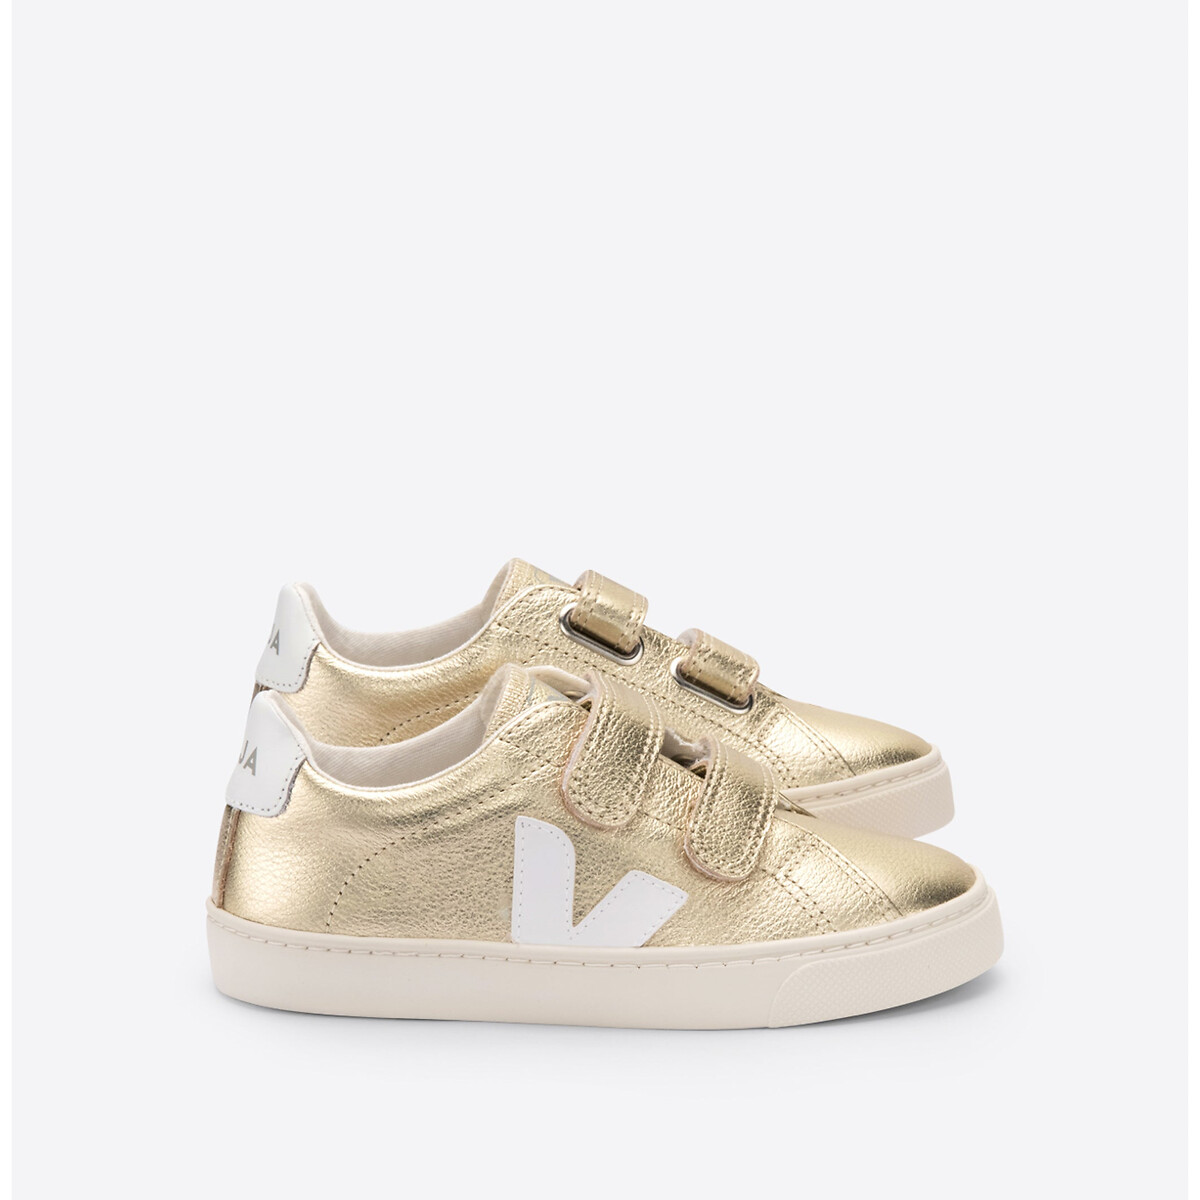 Kids Small Esplar Touch ’n’ Close Metallic Leather Trainers